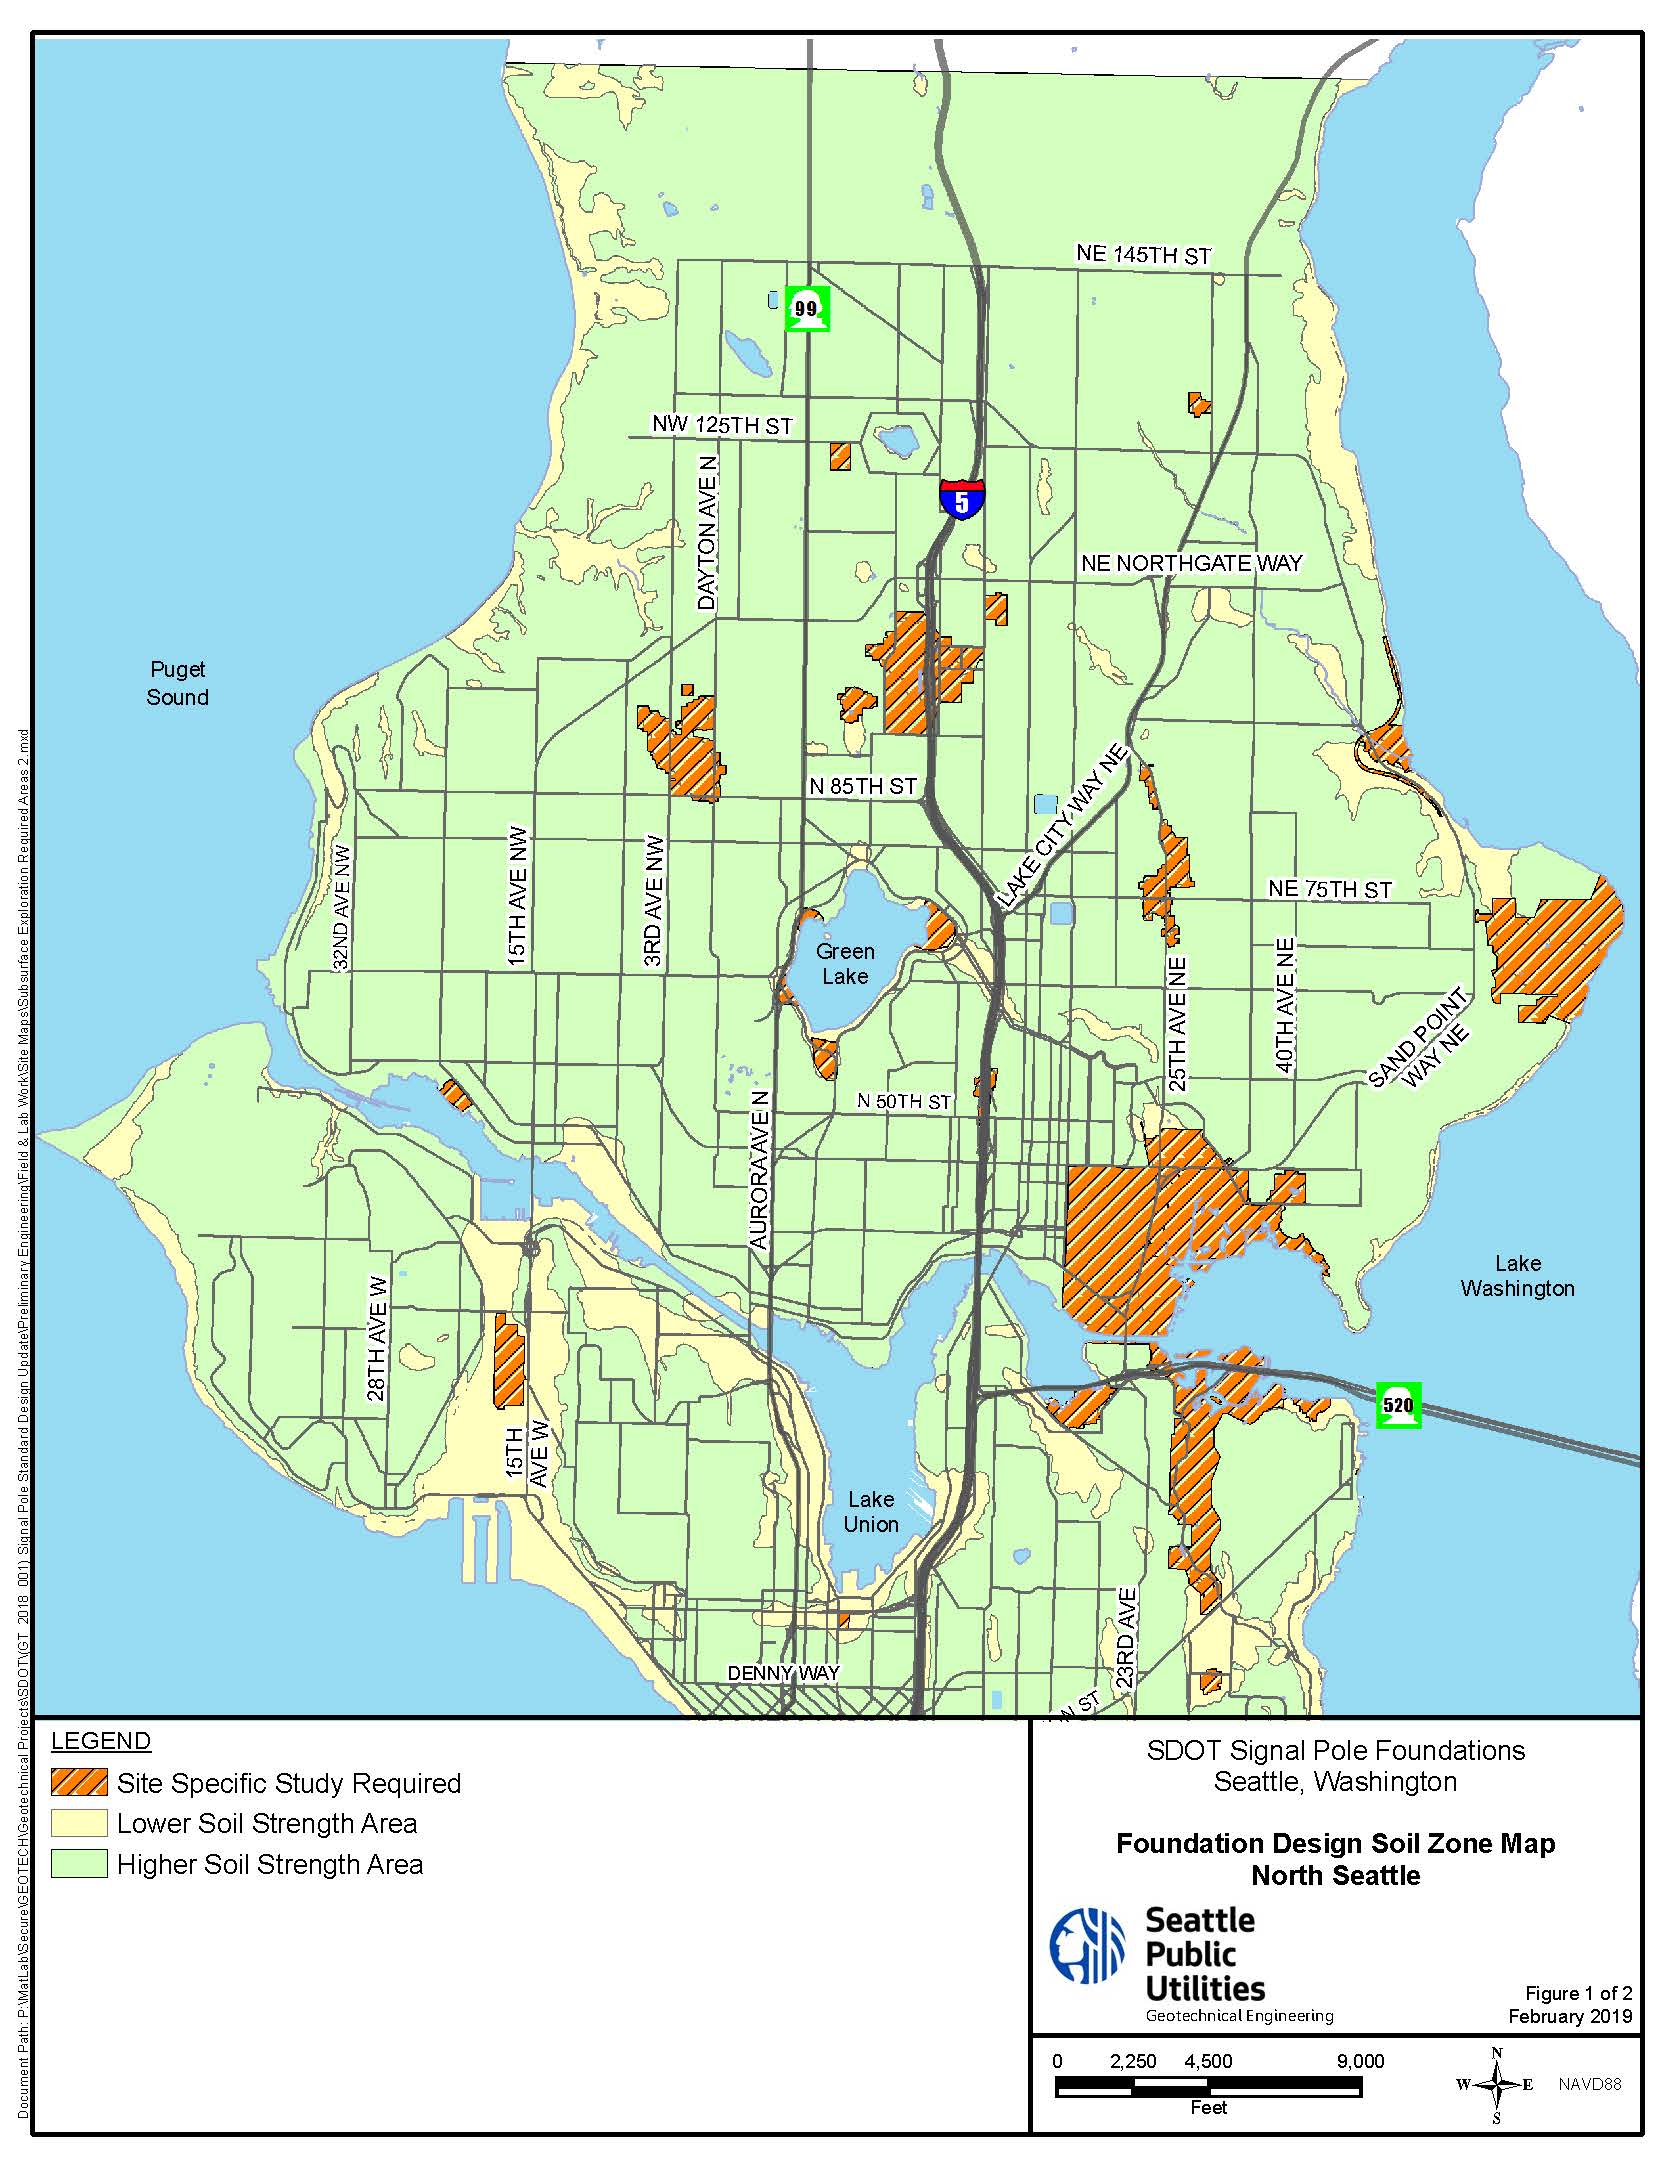 Map of North Seattle that shows the areas that require subsurface exploration